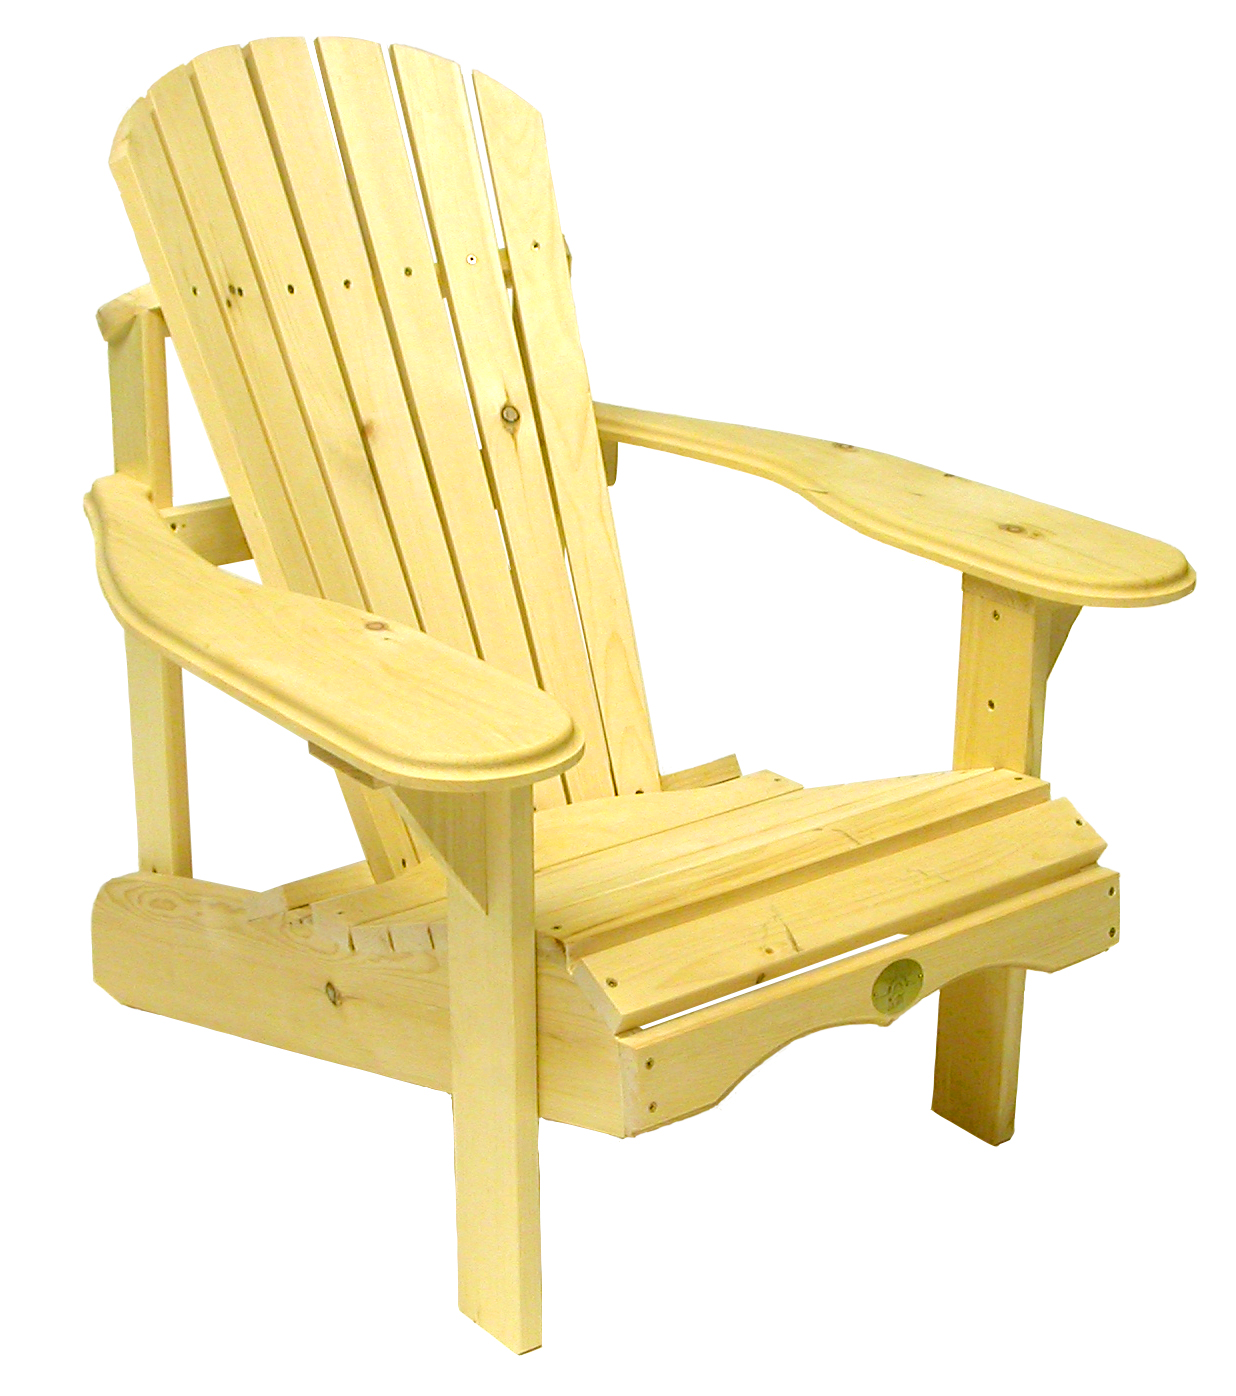 Image of The Bear Chair Company Adirondack Outdoor Chair White Pine